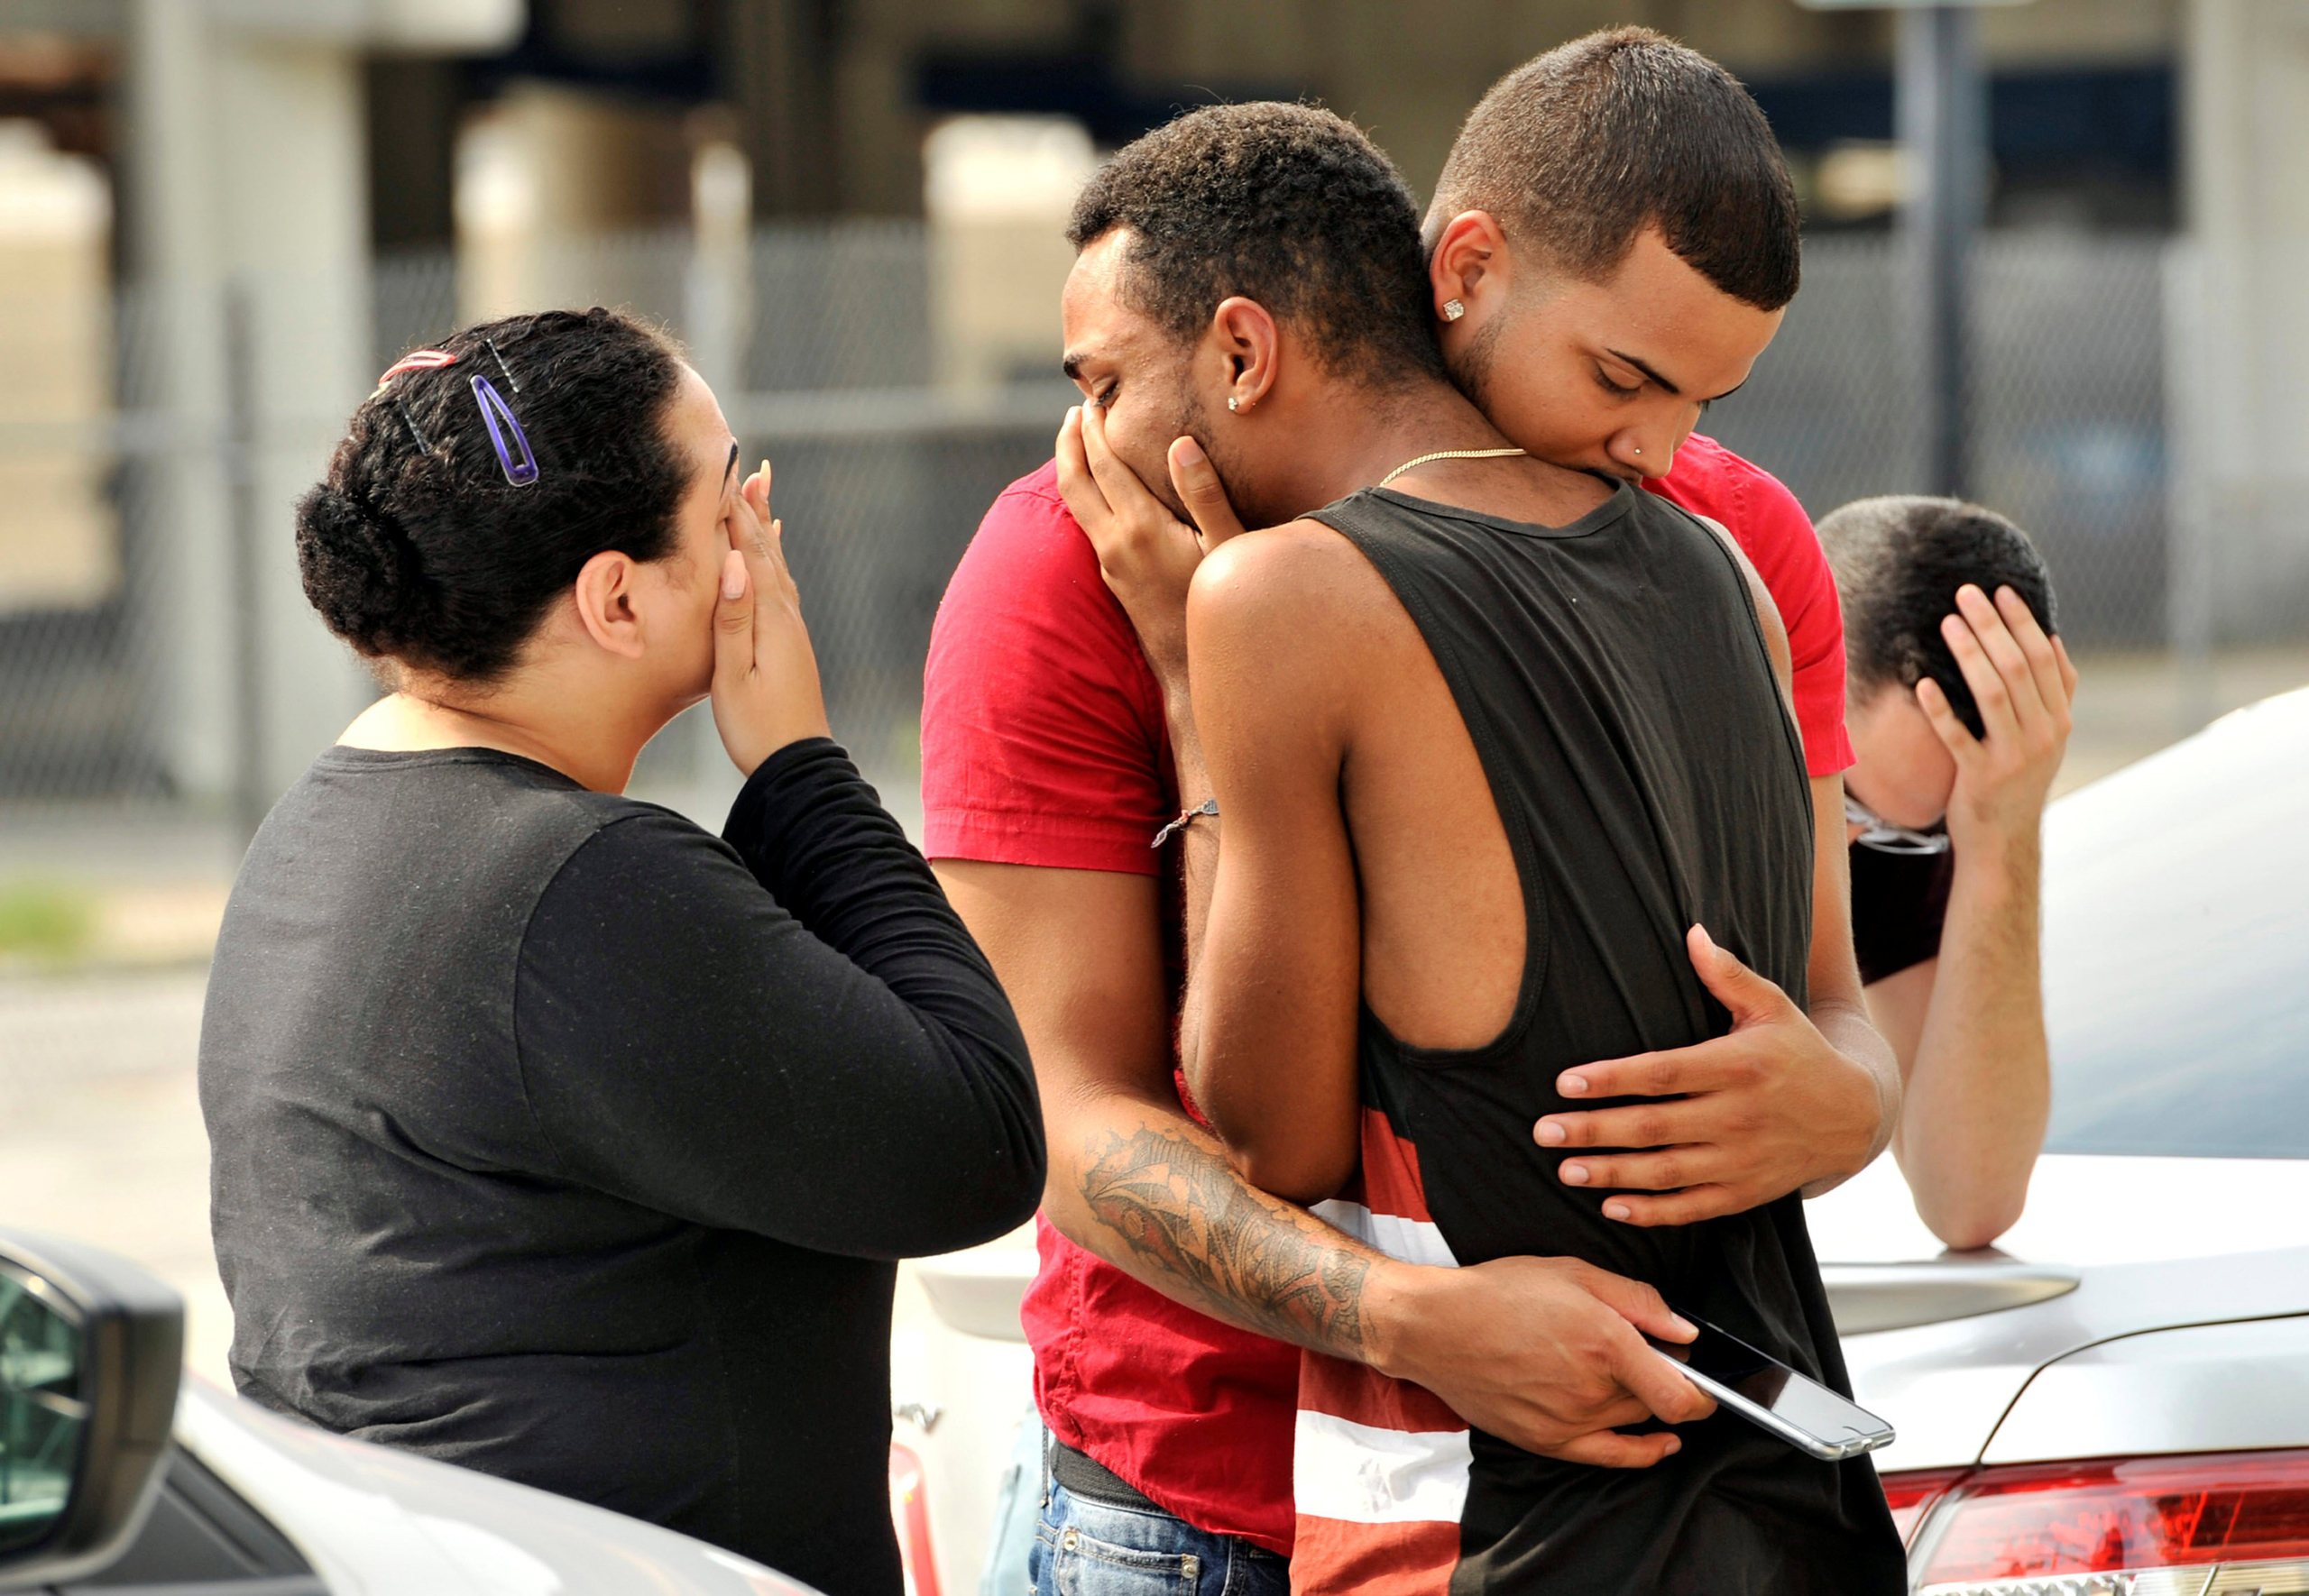 Friends and family members embrace outside the Orlando Police Headquarters during the investigation of a shooting at the Pulse nightclub in Orlando, Fla., on June 13, 2016. (Steve Nesius—Reuters)